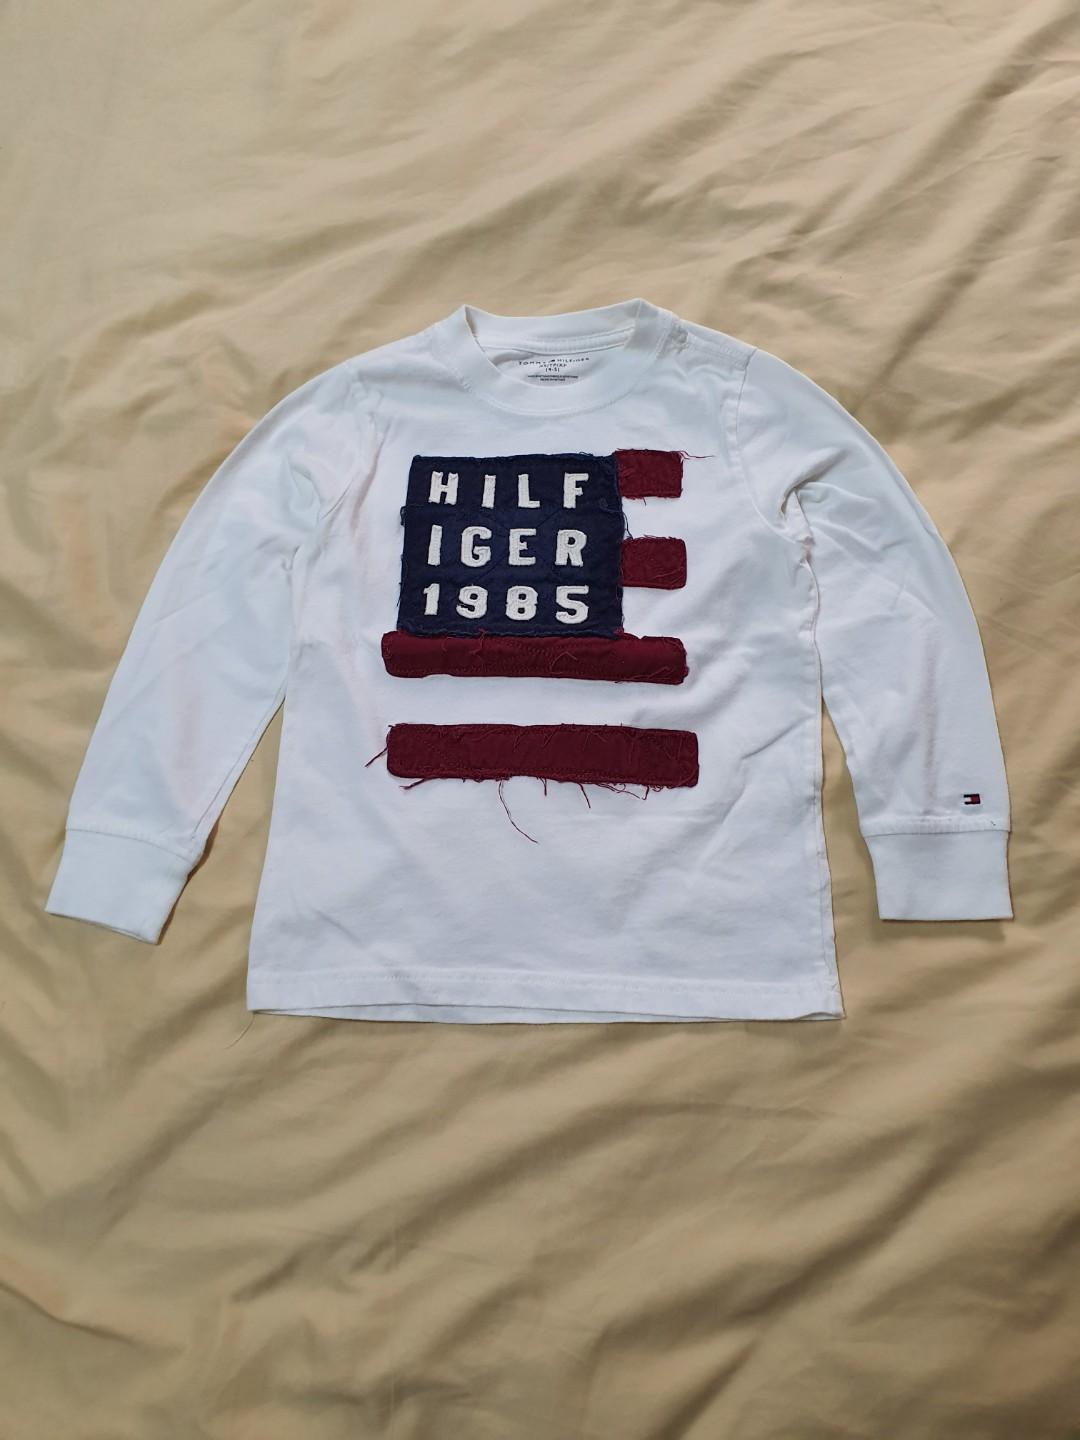 Tommy Hilfiger White Long Sleeve T-shirt, Size: 4-5, Kid's Clothes ...